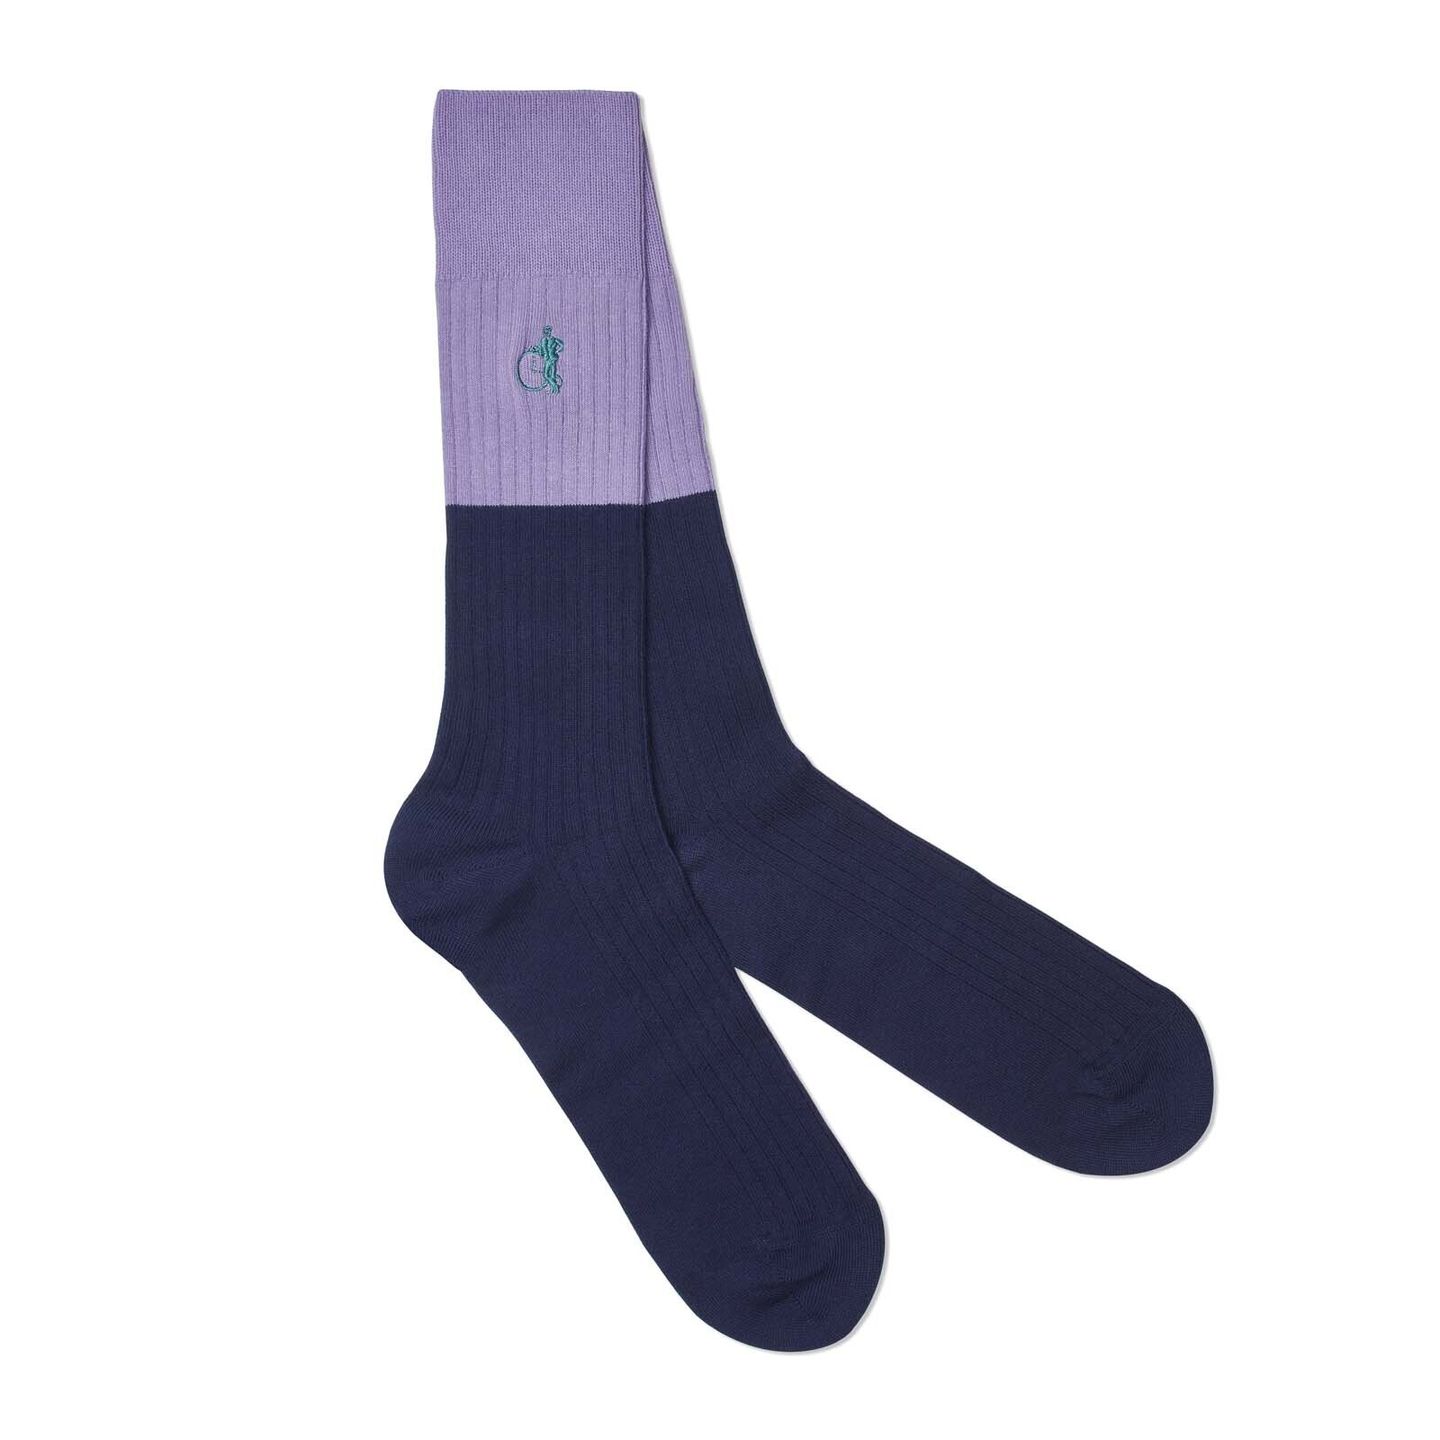 A pair of half and half light and dark purple socks with a white background